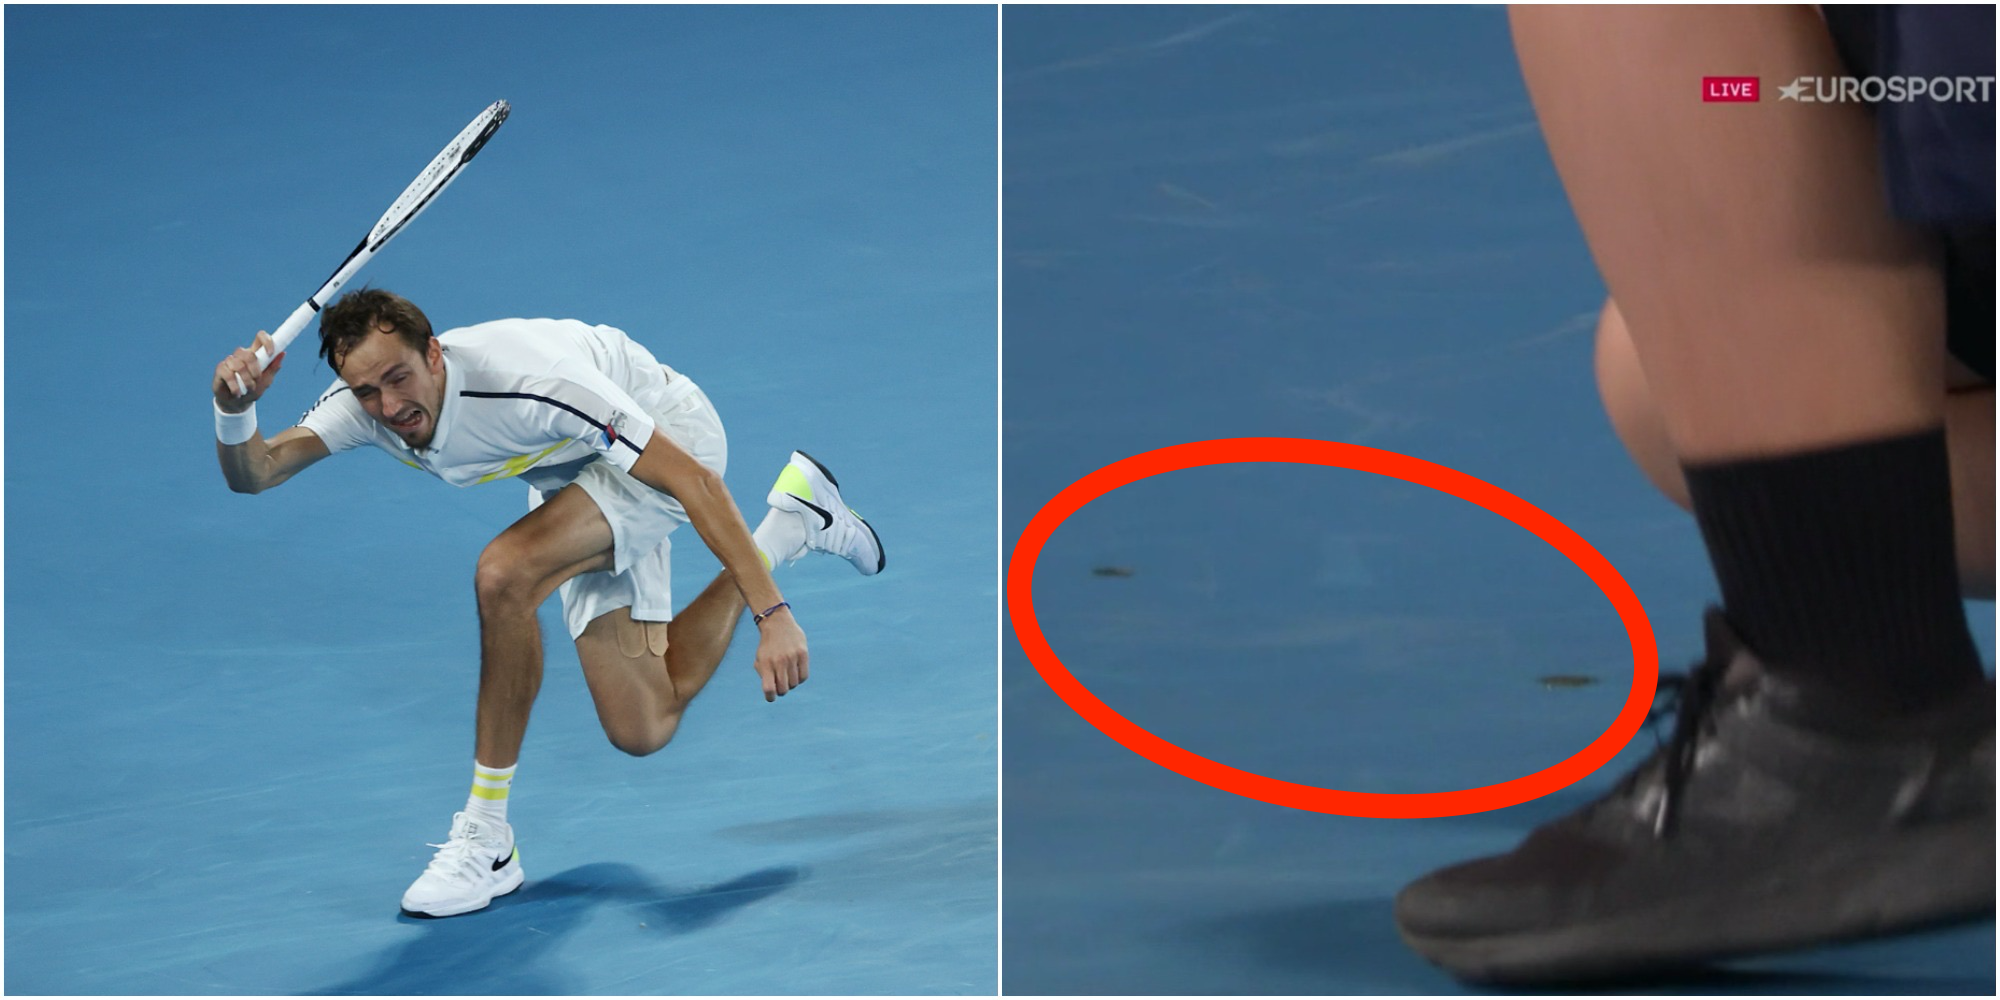 Bird poop briefly stopped play as Daniil Medvedev bludgeoned Stefanos Tsitsipas on his way to the Australian Open final